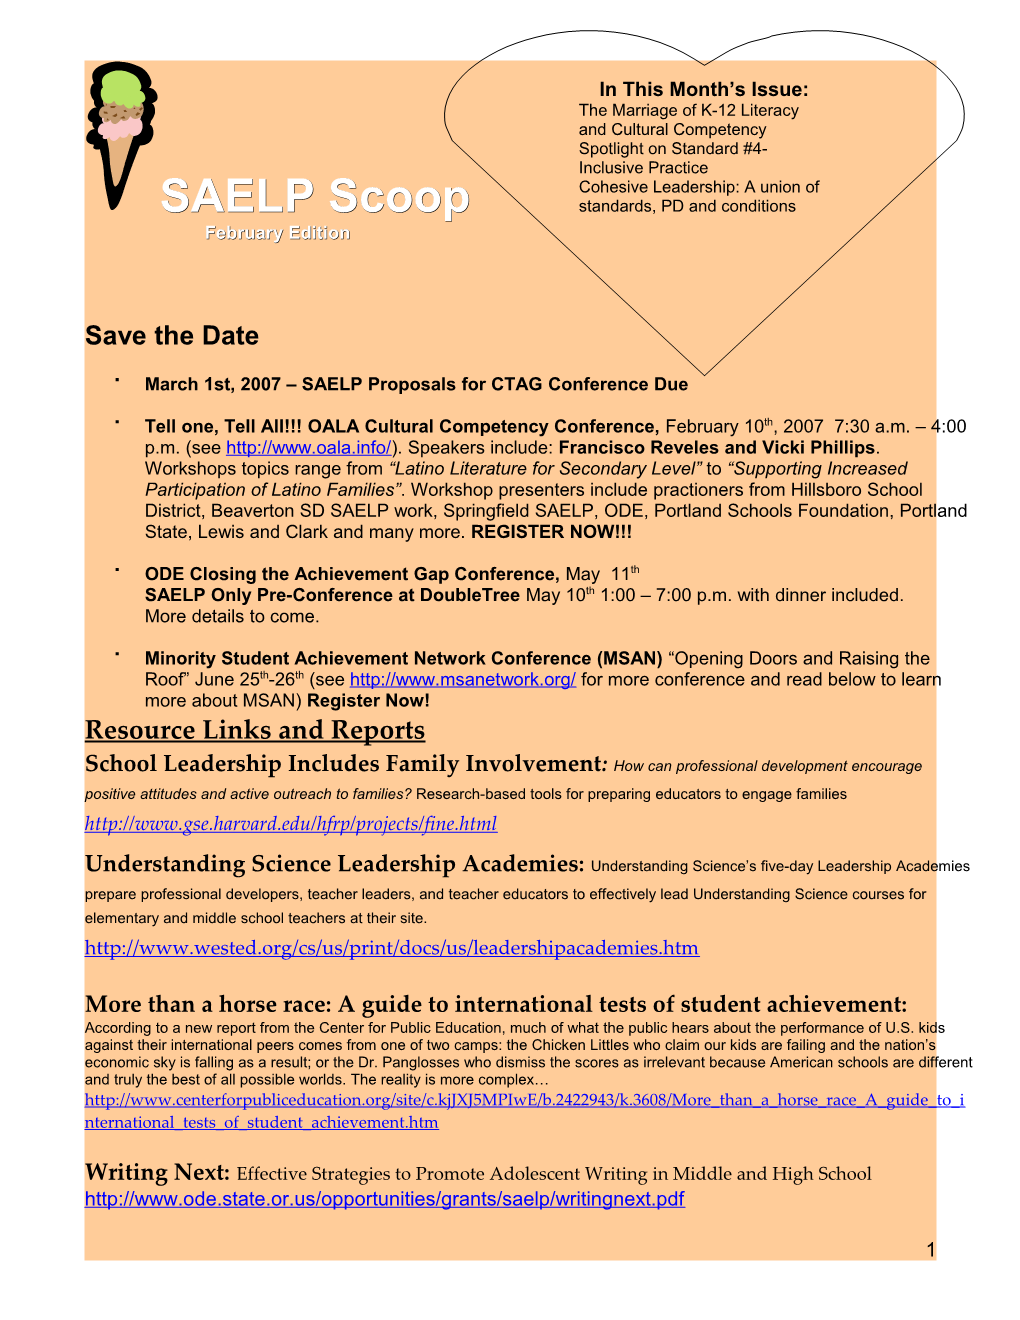 March 1St, 2007 SAELP Proposals for CTAG Conference Due